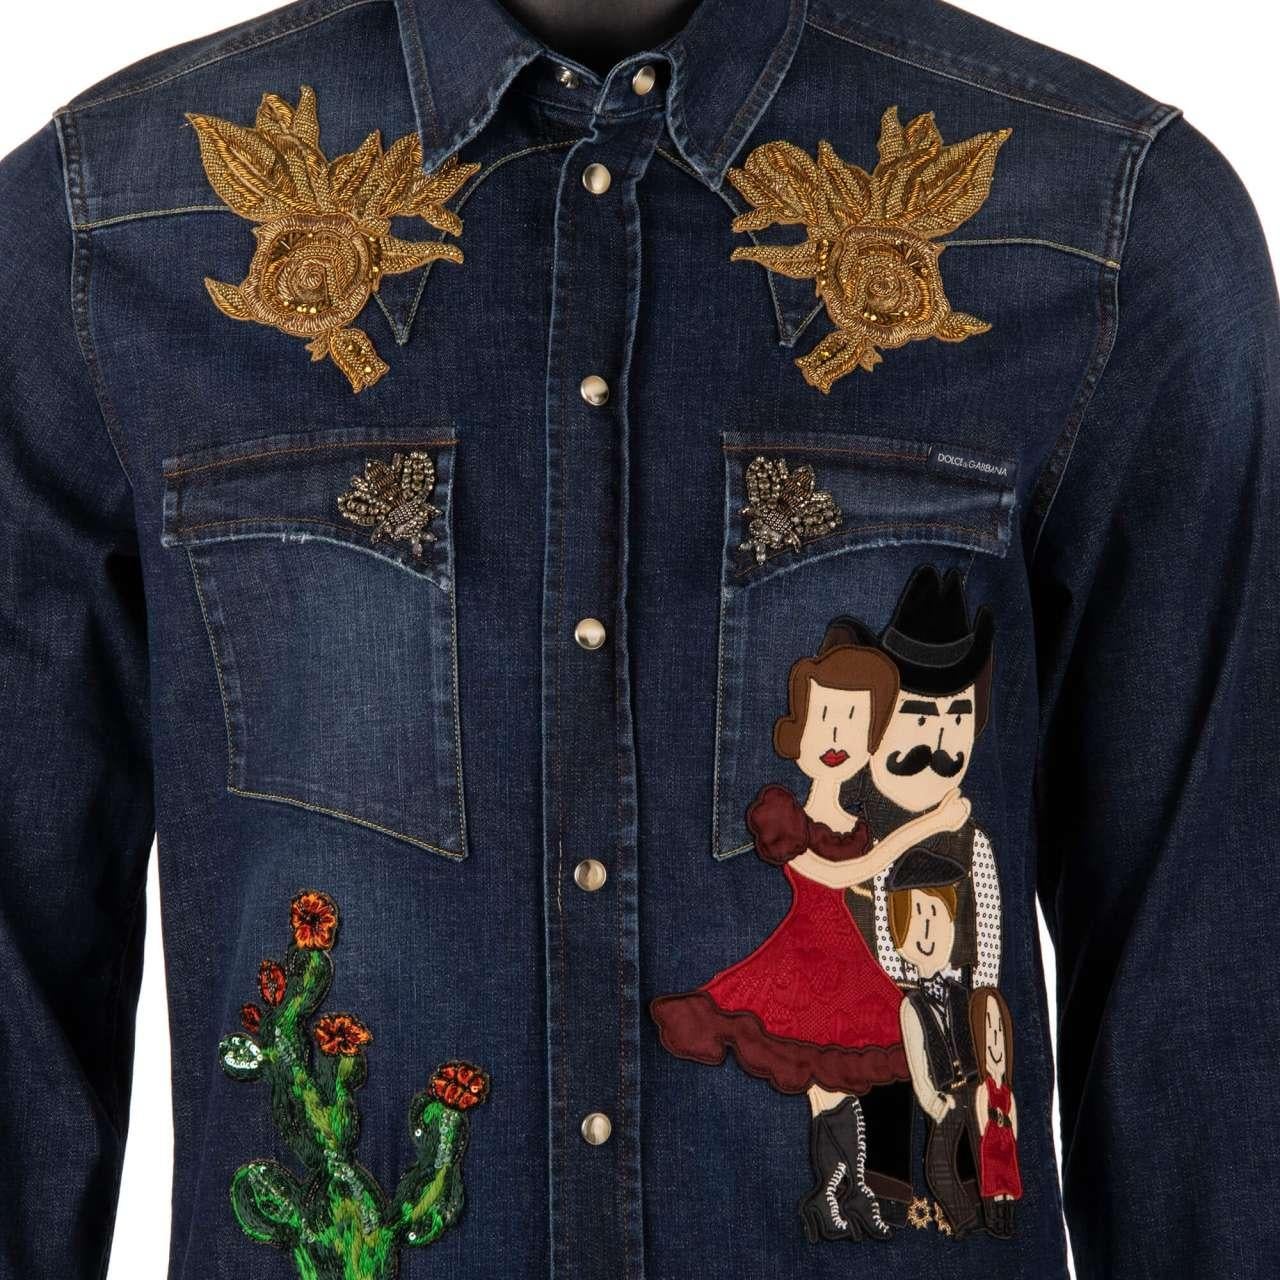 - Goldwork hand-embroidered Jeans / Denim shirt with DG Family, roses, crystal bees and cactus applications, push button fastening and two front pockets in blue by DOLCE & GABBANA - New with tag - Former RRP: EUR 1.950 - MADE IN ITALY - Slim Fit -